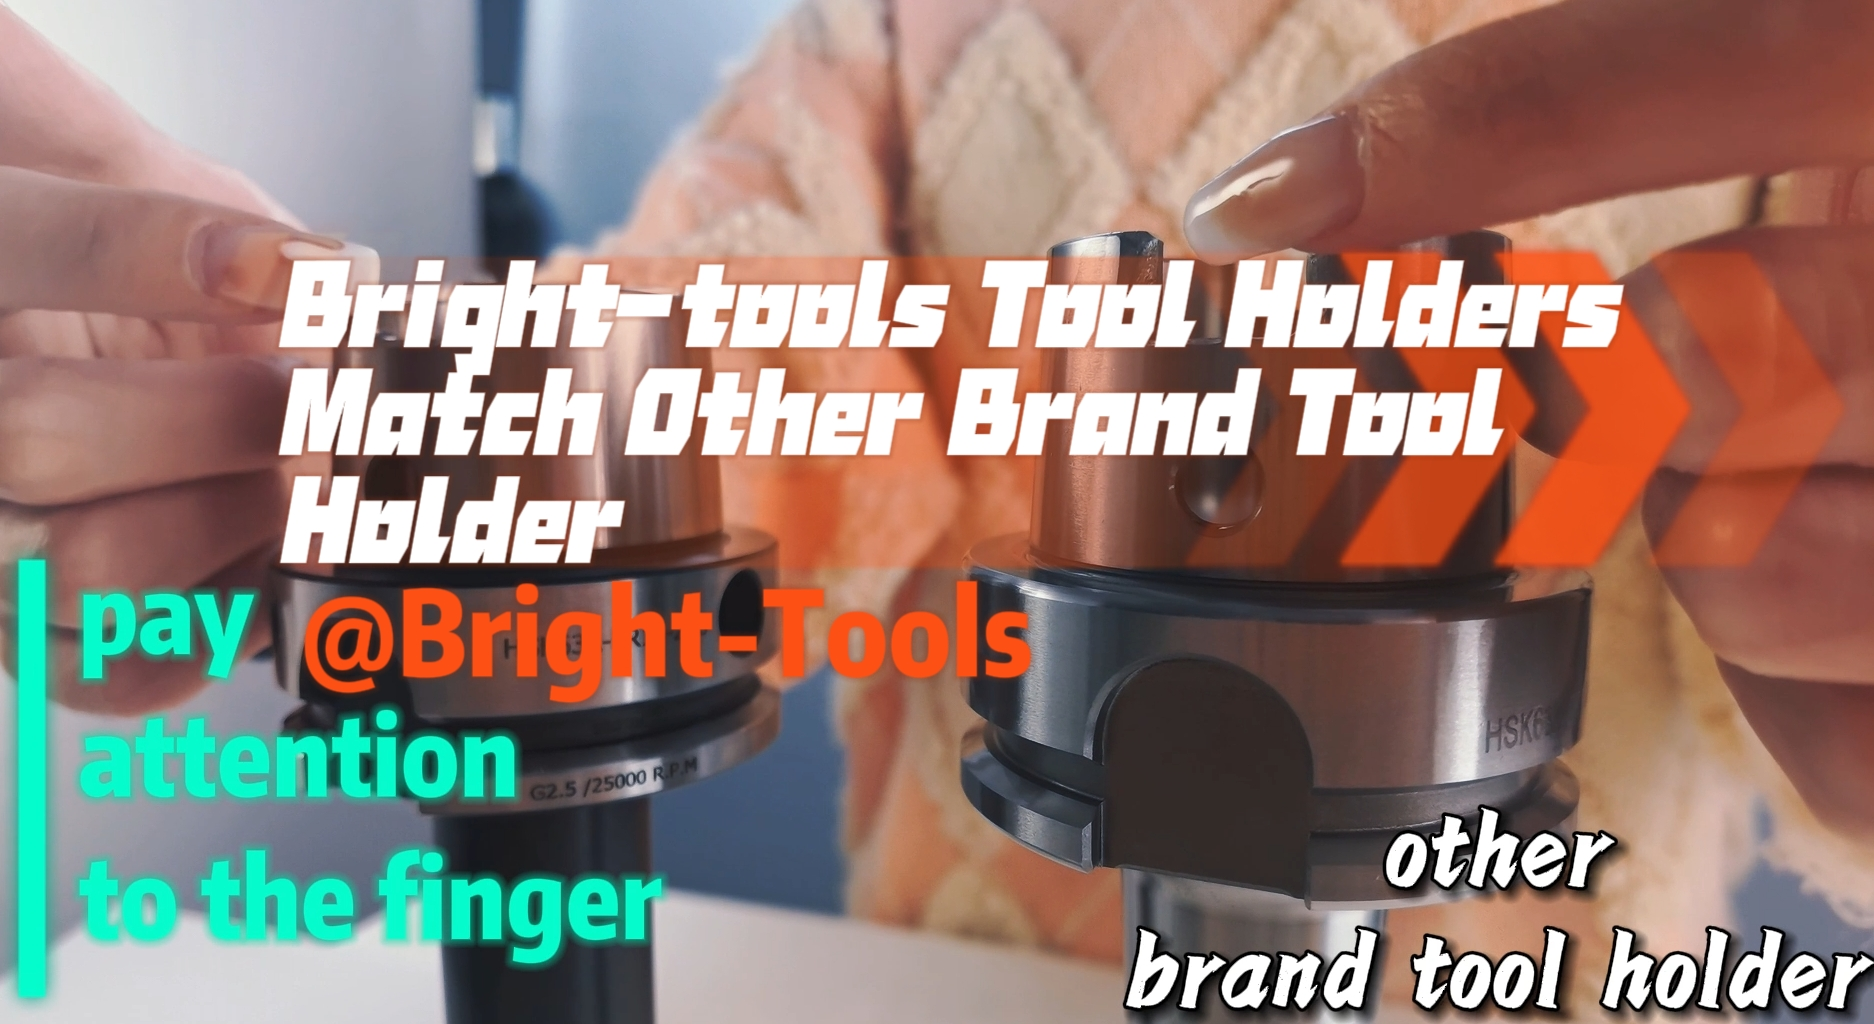 Bright-tools Tool Holders Match Other Brand Tool Holder